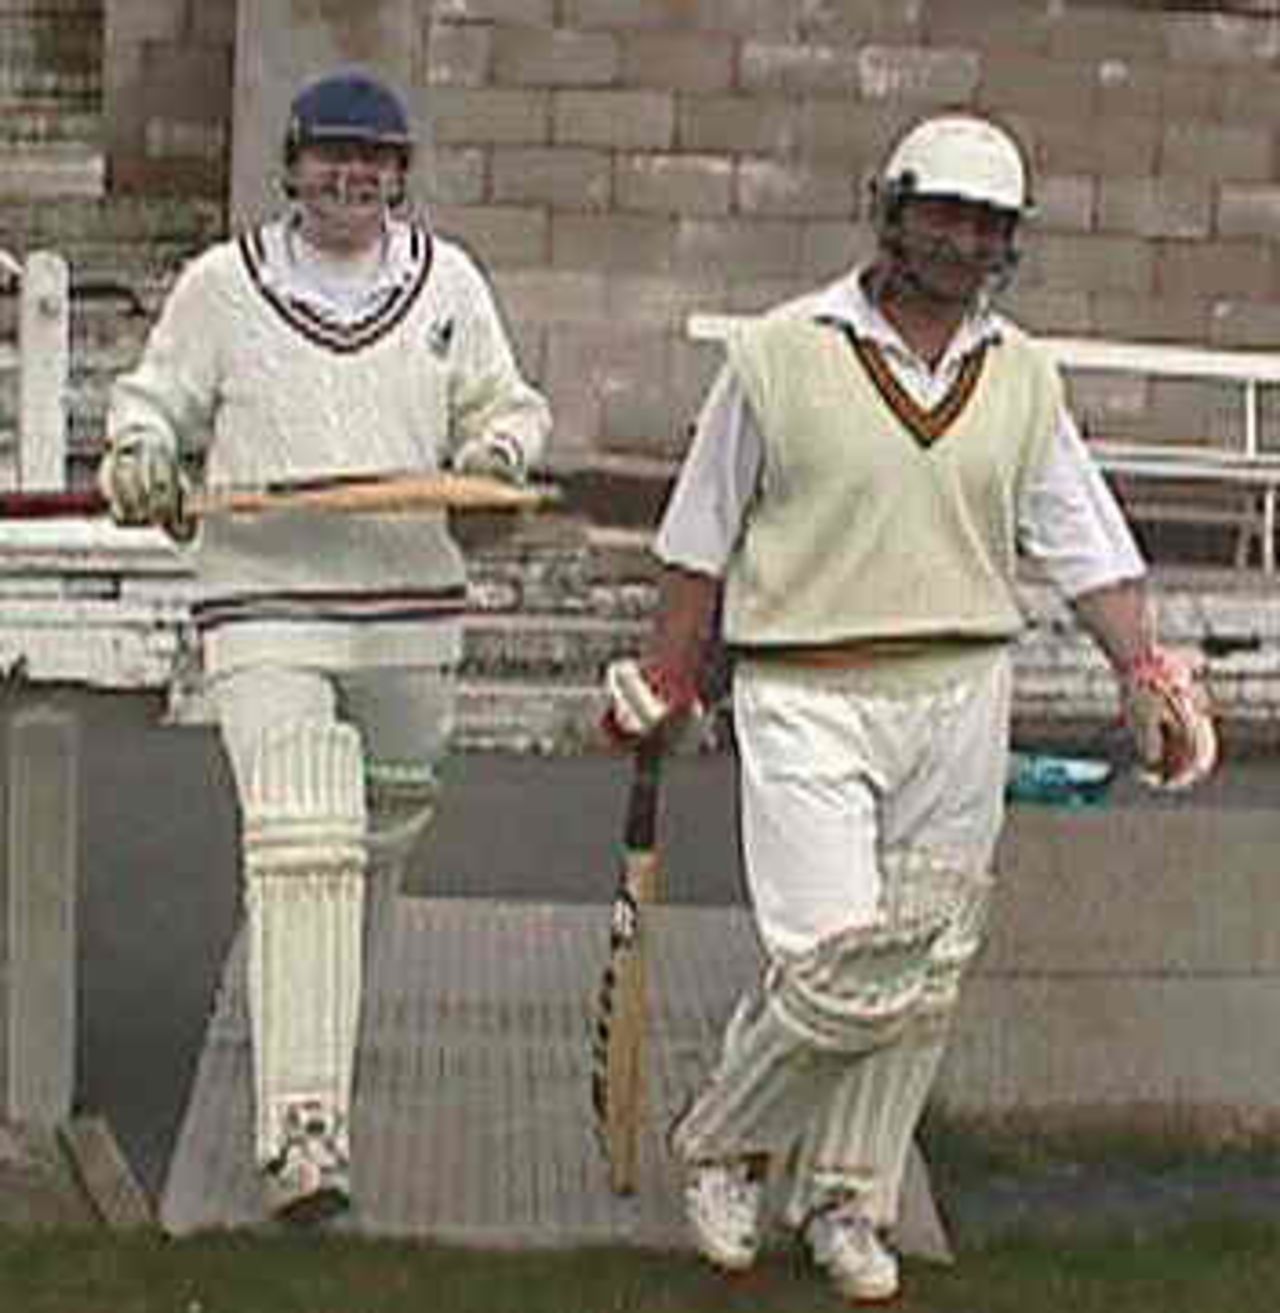 Accrington openers Steve Birtwistle and Mushtaq Ahmed step out to face the Colne bowlers at Thorneyholme Road.